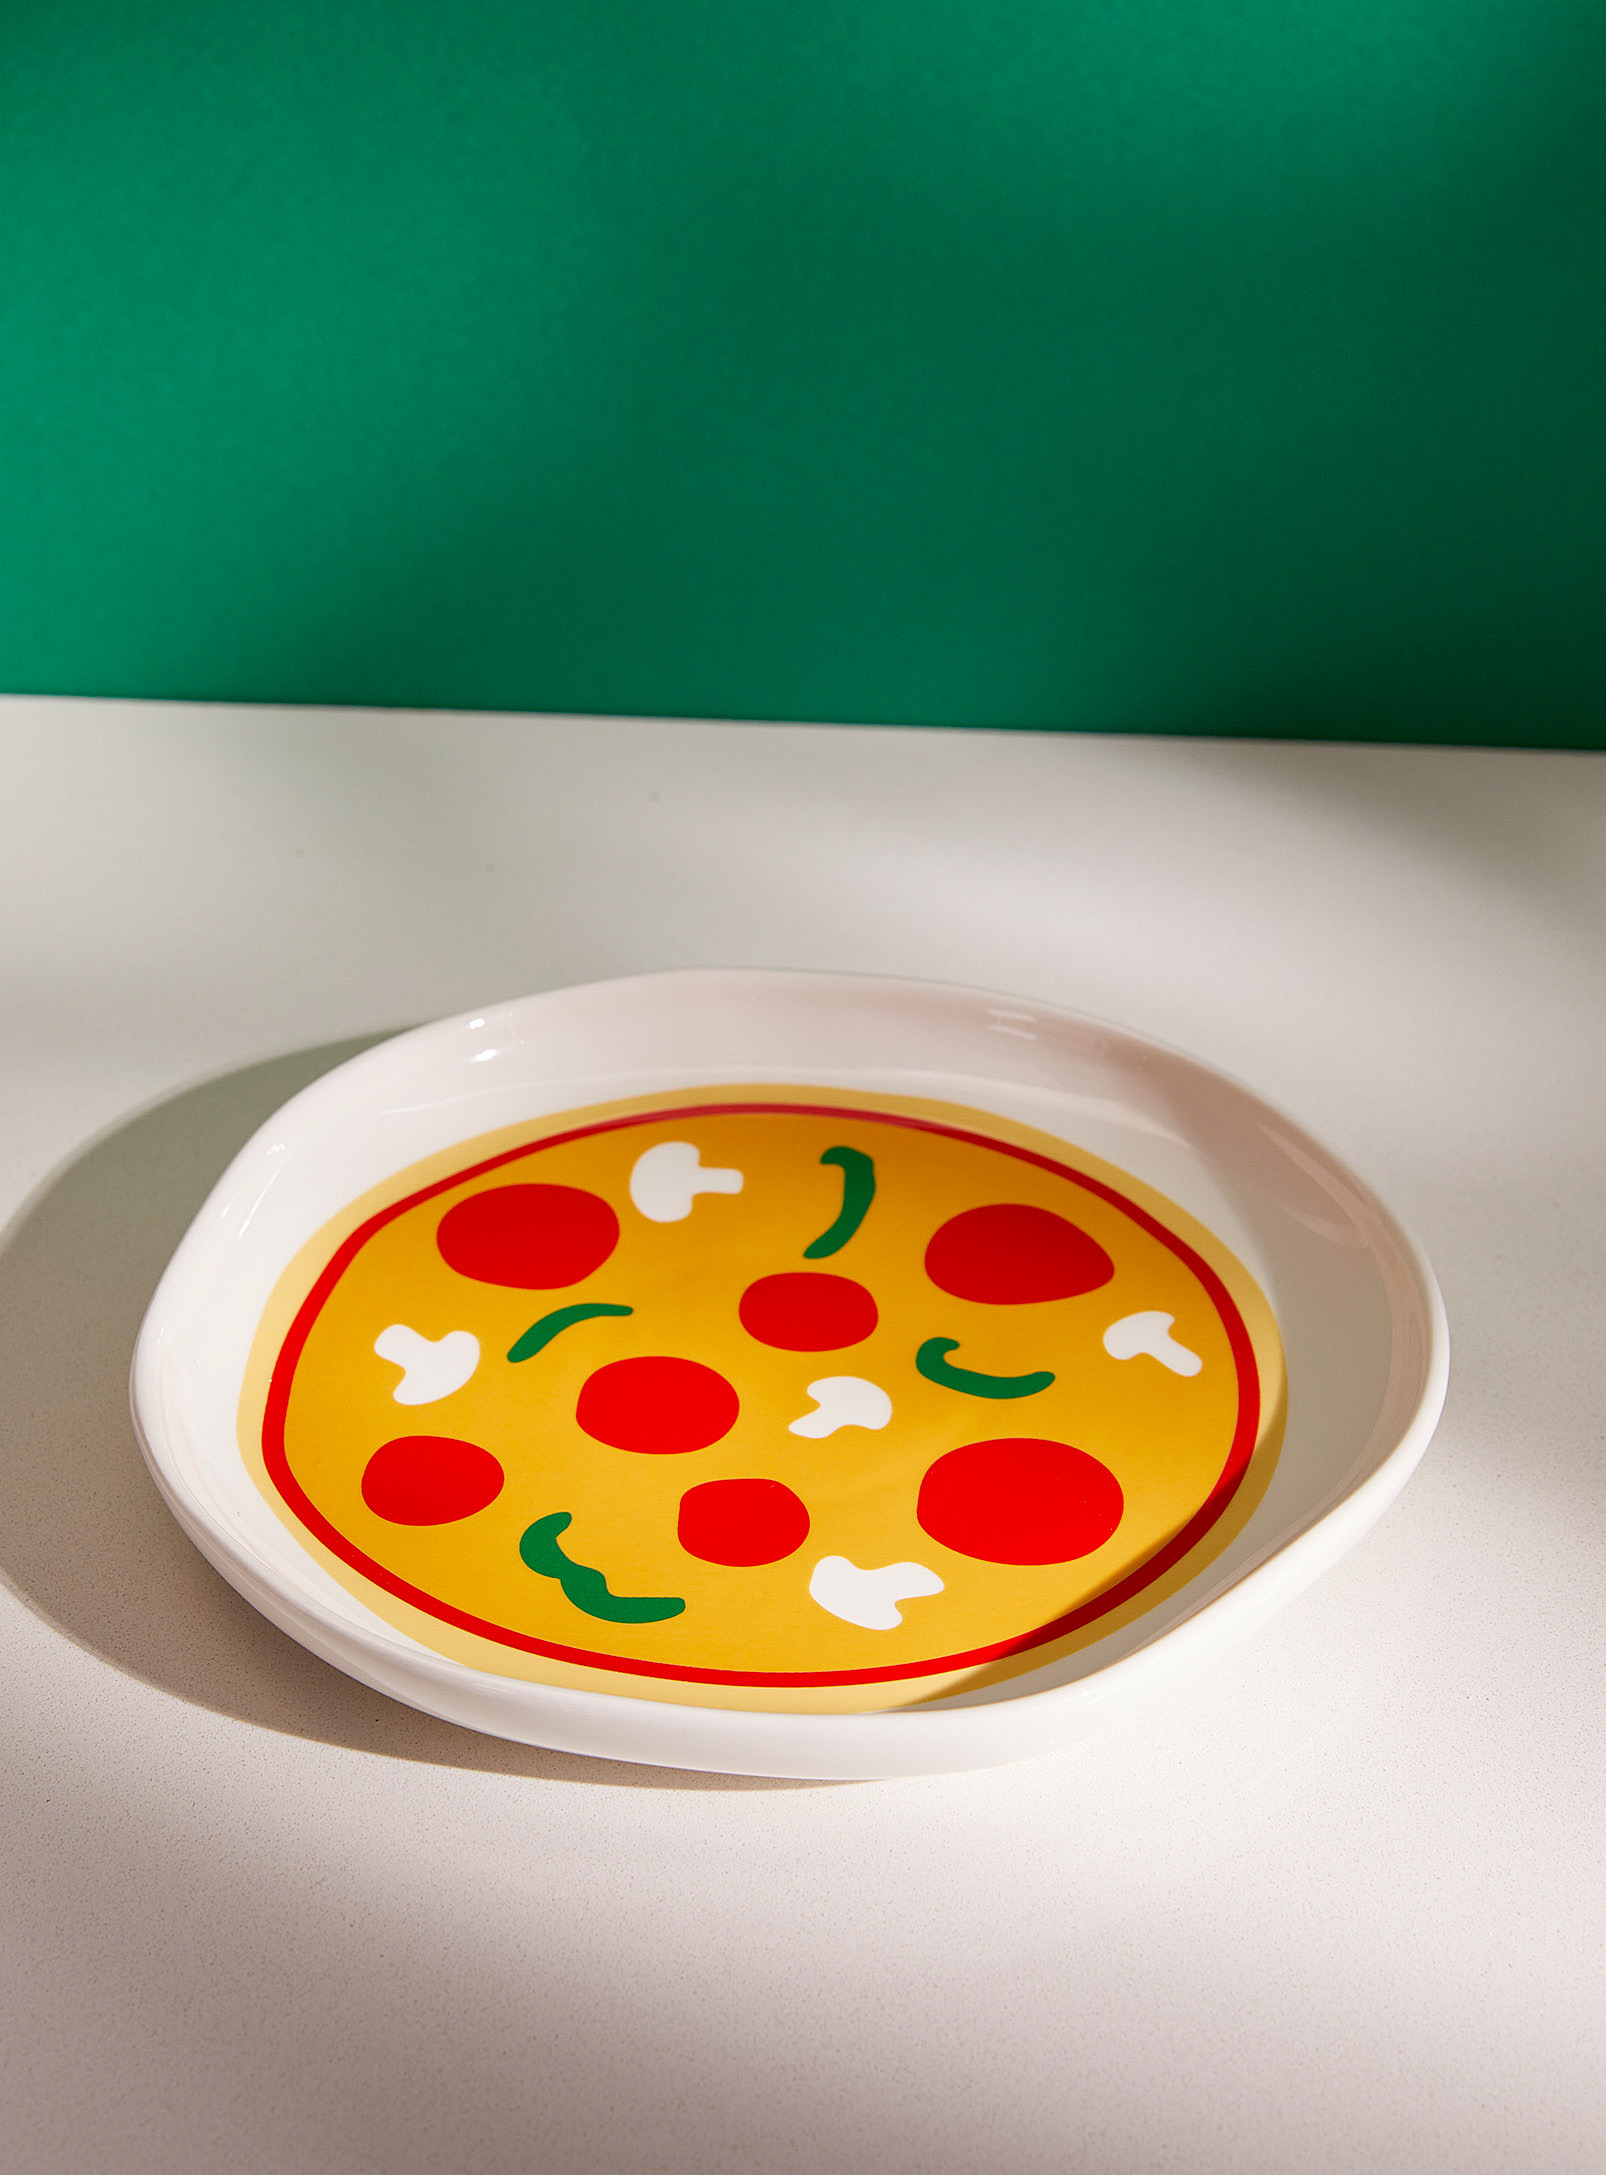 Simons Maison All-dressed Pizza Plate In Patterned Red